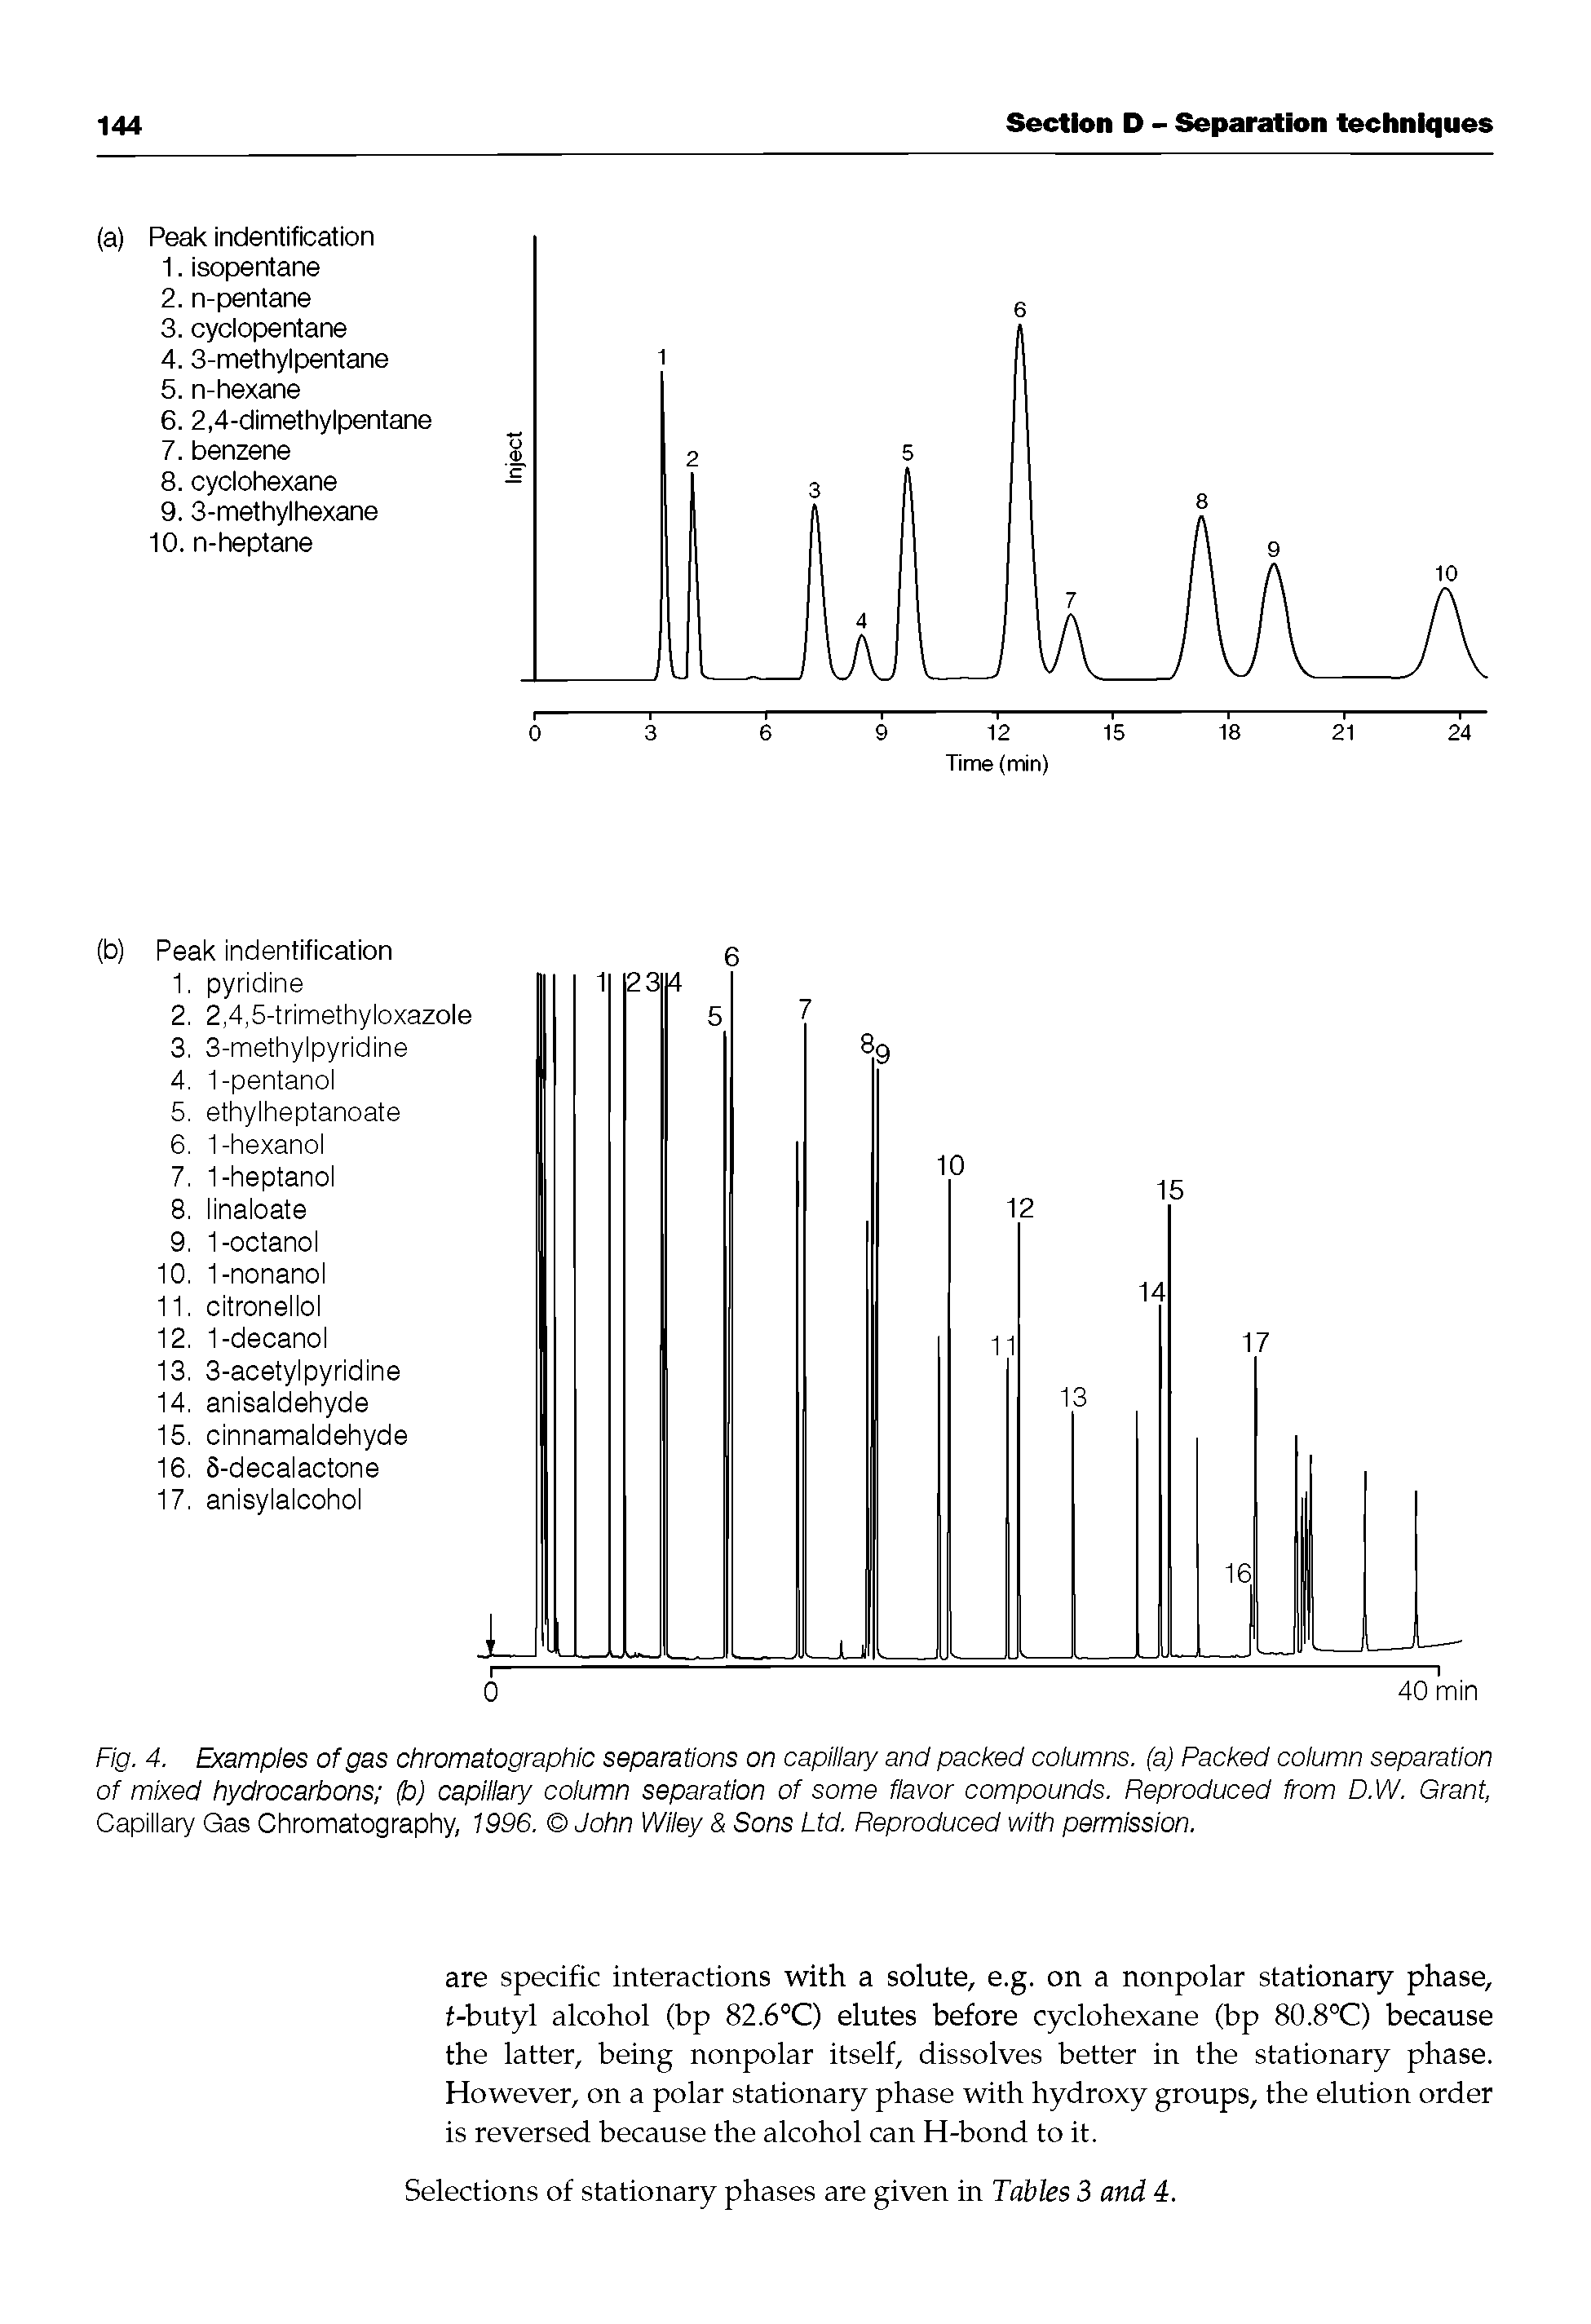 Fig. 4. Examples of gas chromatographic separations on capillary and packed columns, (a) Packed column separation of mixed hydrocarbons (b) capillary column separation of some flavor compounds. Reproduced from D.W. Grant, Capillary Qas Chromatography, 1996. John Wiley Sons Ltd. Reproduced with permission.